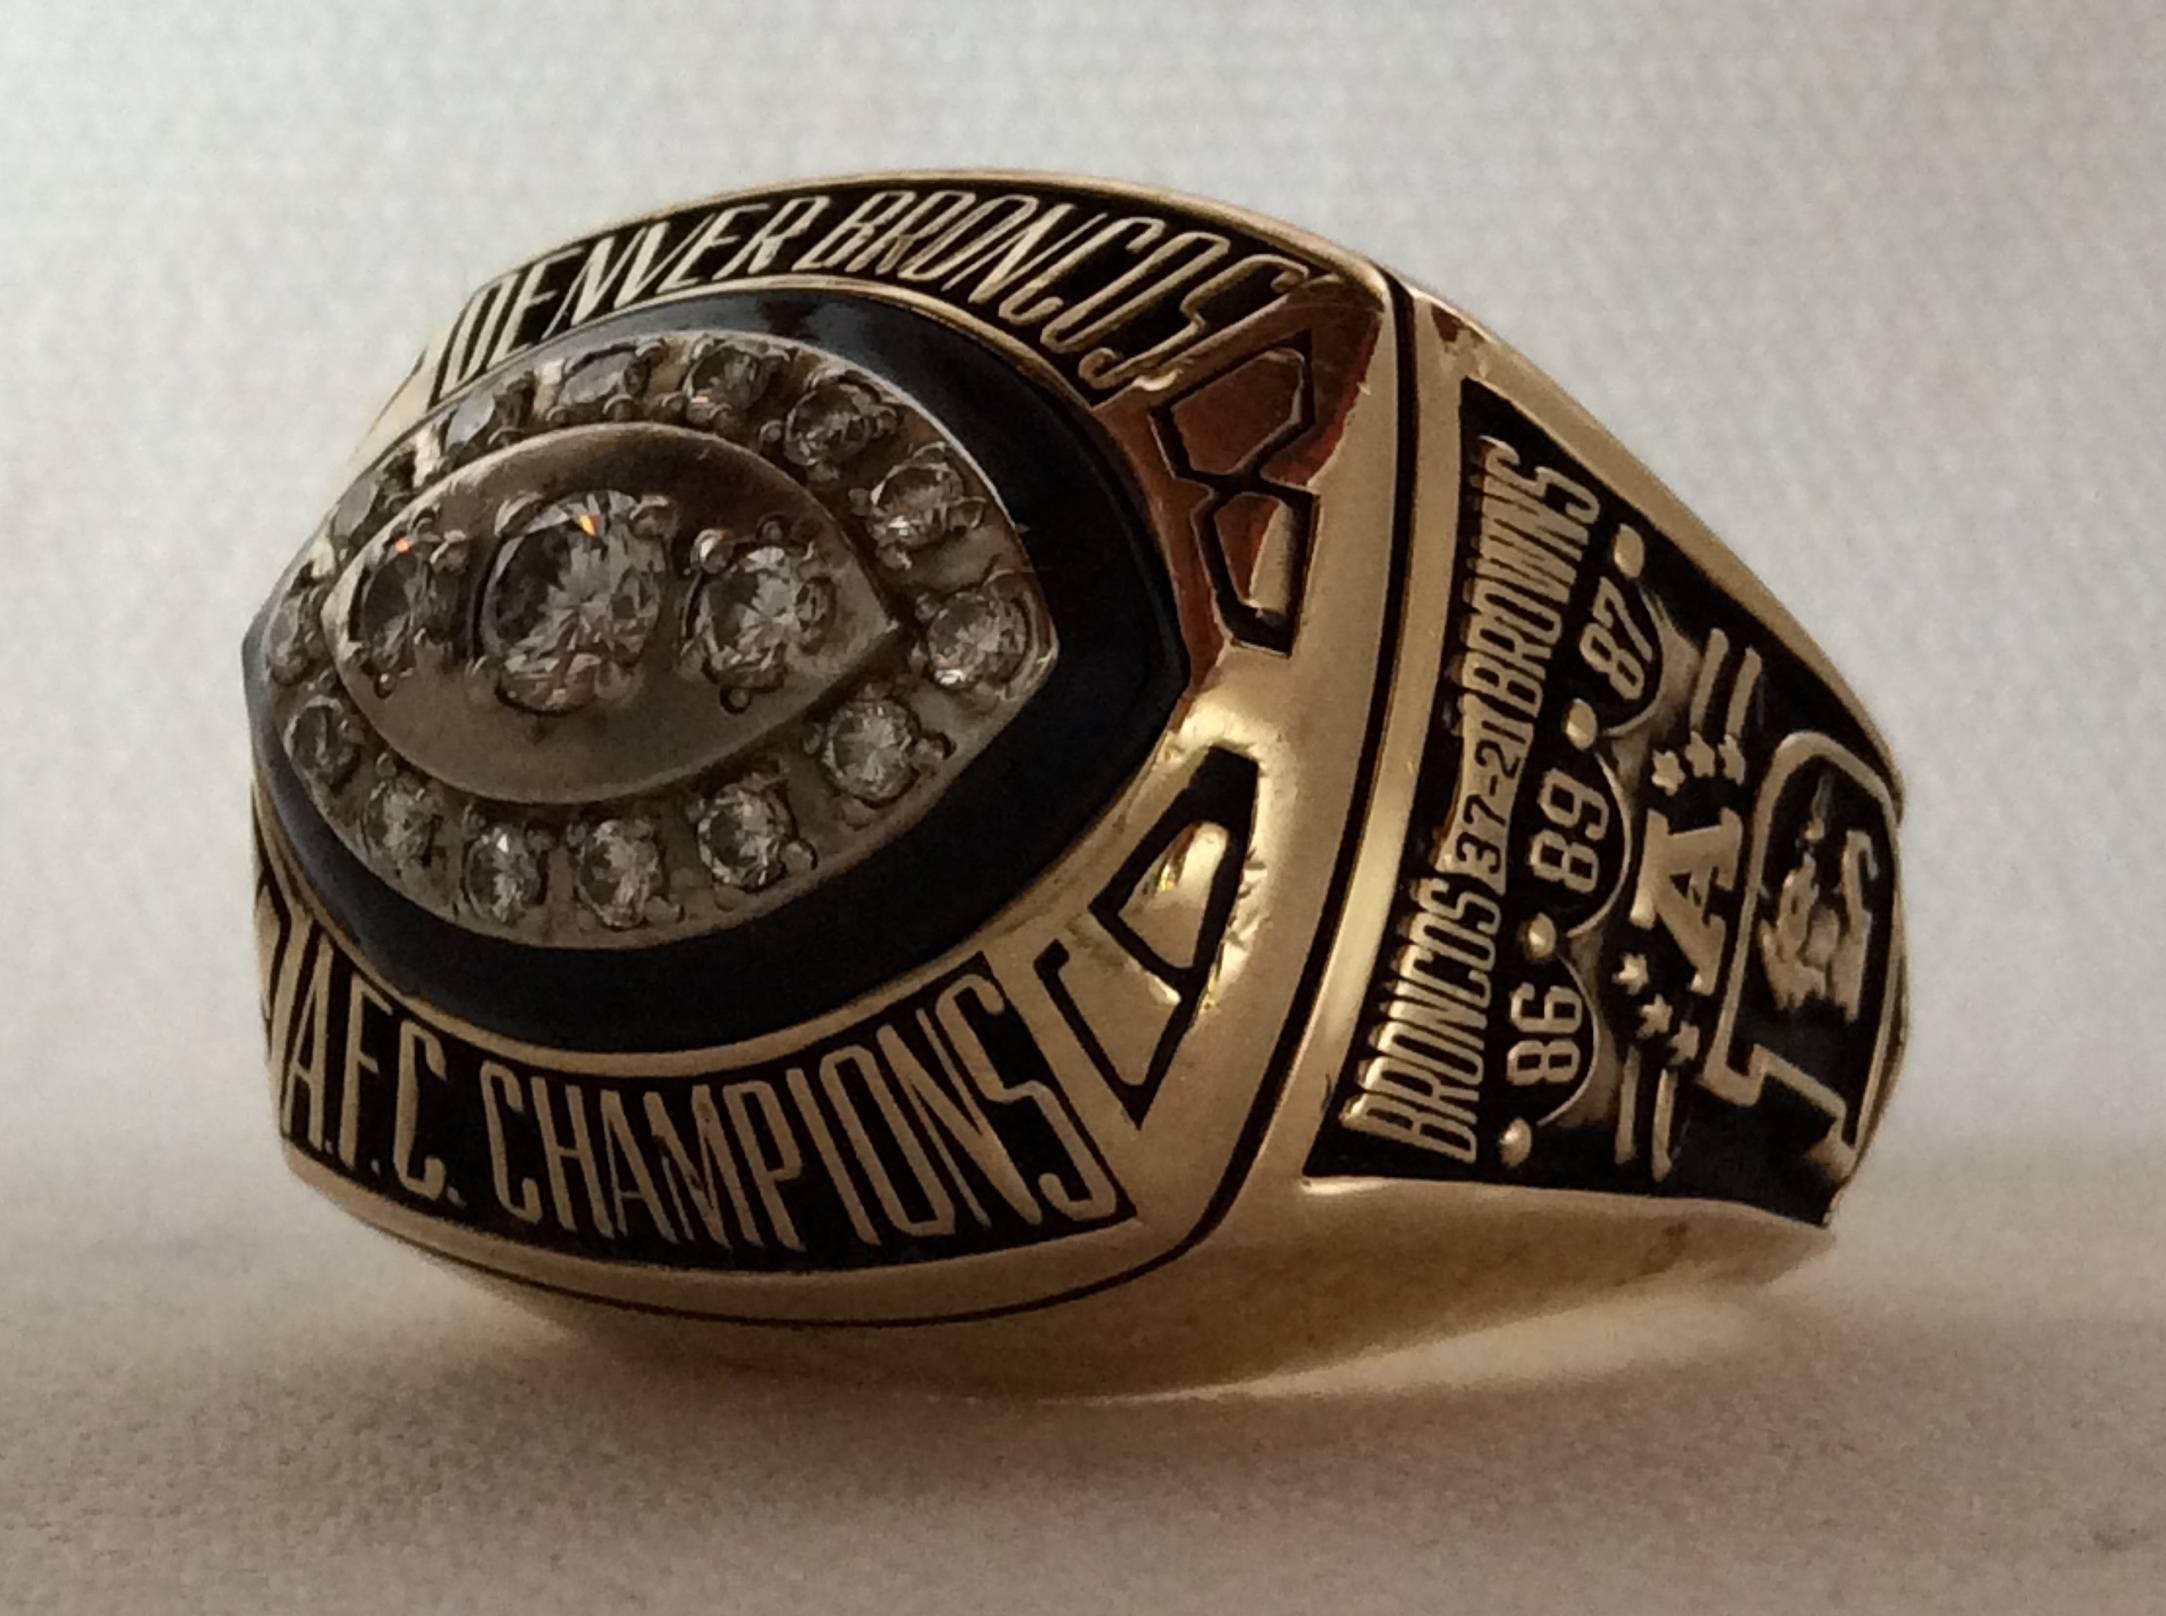 1989 Denver Broncos AFC Championship super bowl players ring. Ring is manufactured by Jostens, made of 10-karat gold with all real, genuine high grade diamonds. This ring is an original issue, authentic practice players ring. Guaranteed authentic.